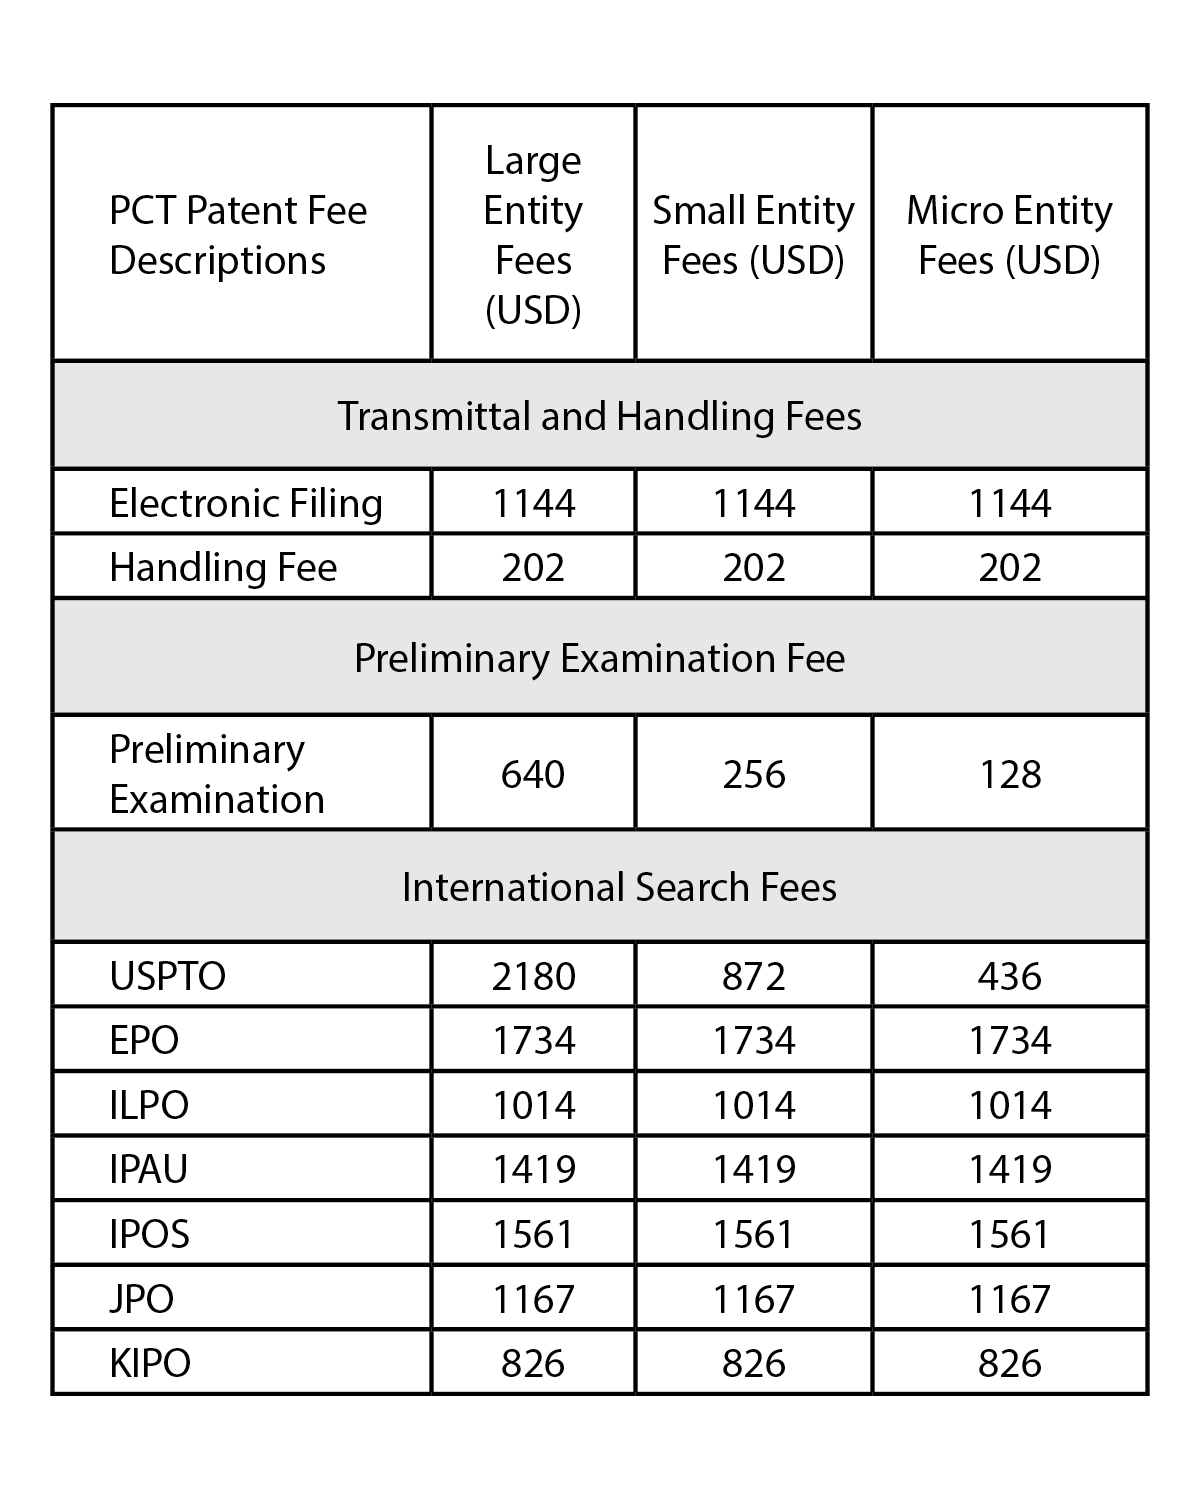 New USPTO Fee Schedule Reduces Costs for PCT Patent Filings and Small